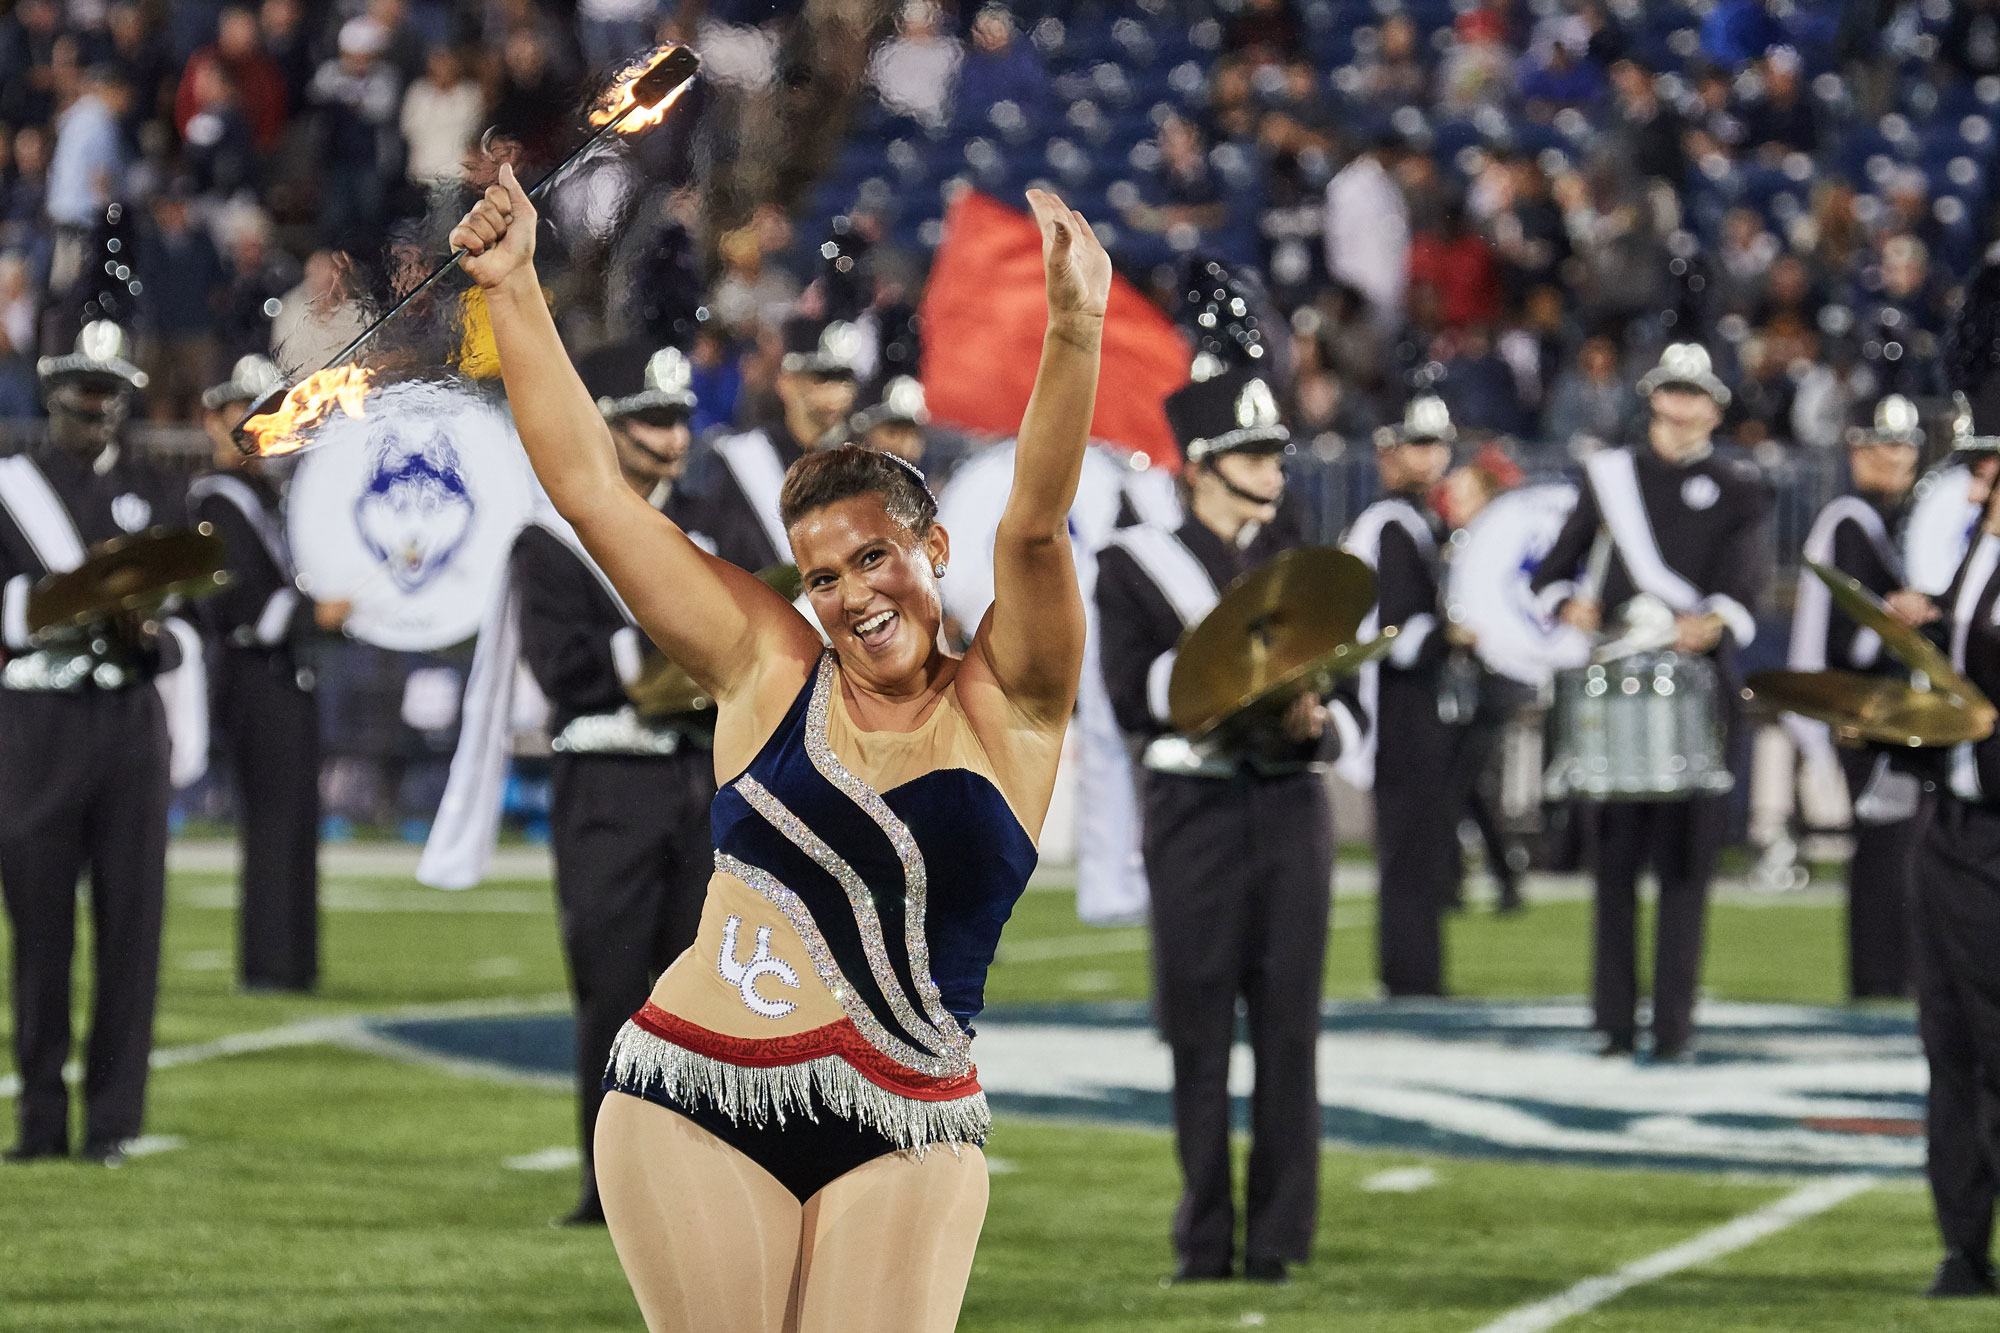 The UConn Marching Band at Rentschler Field